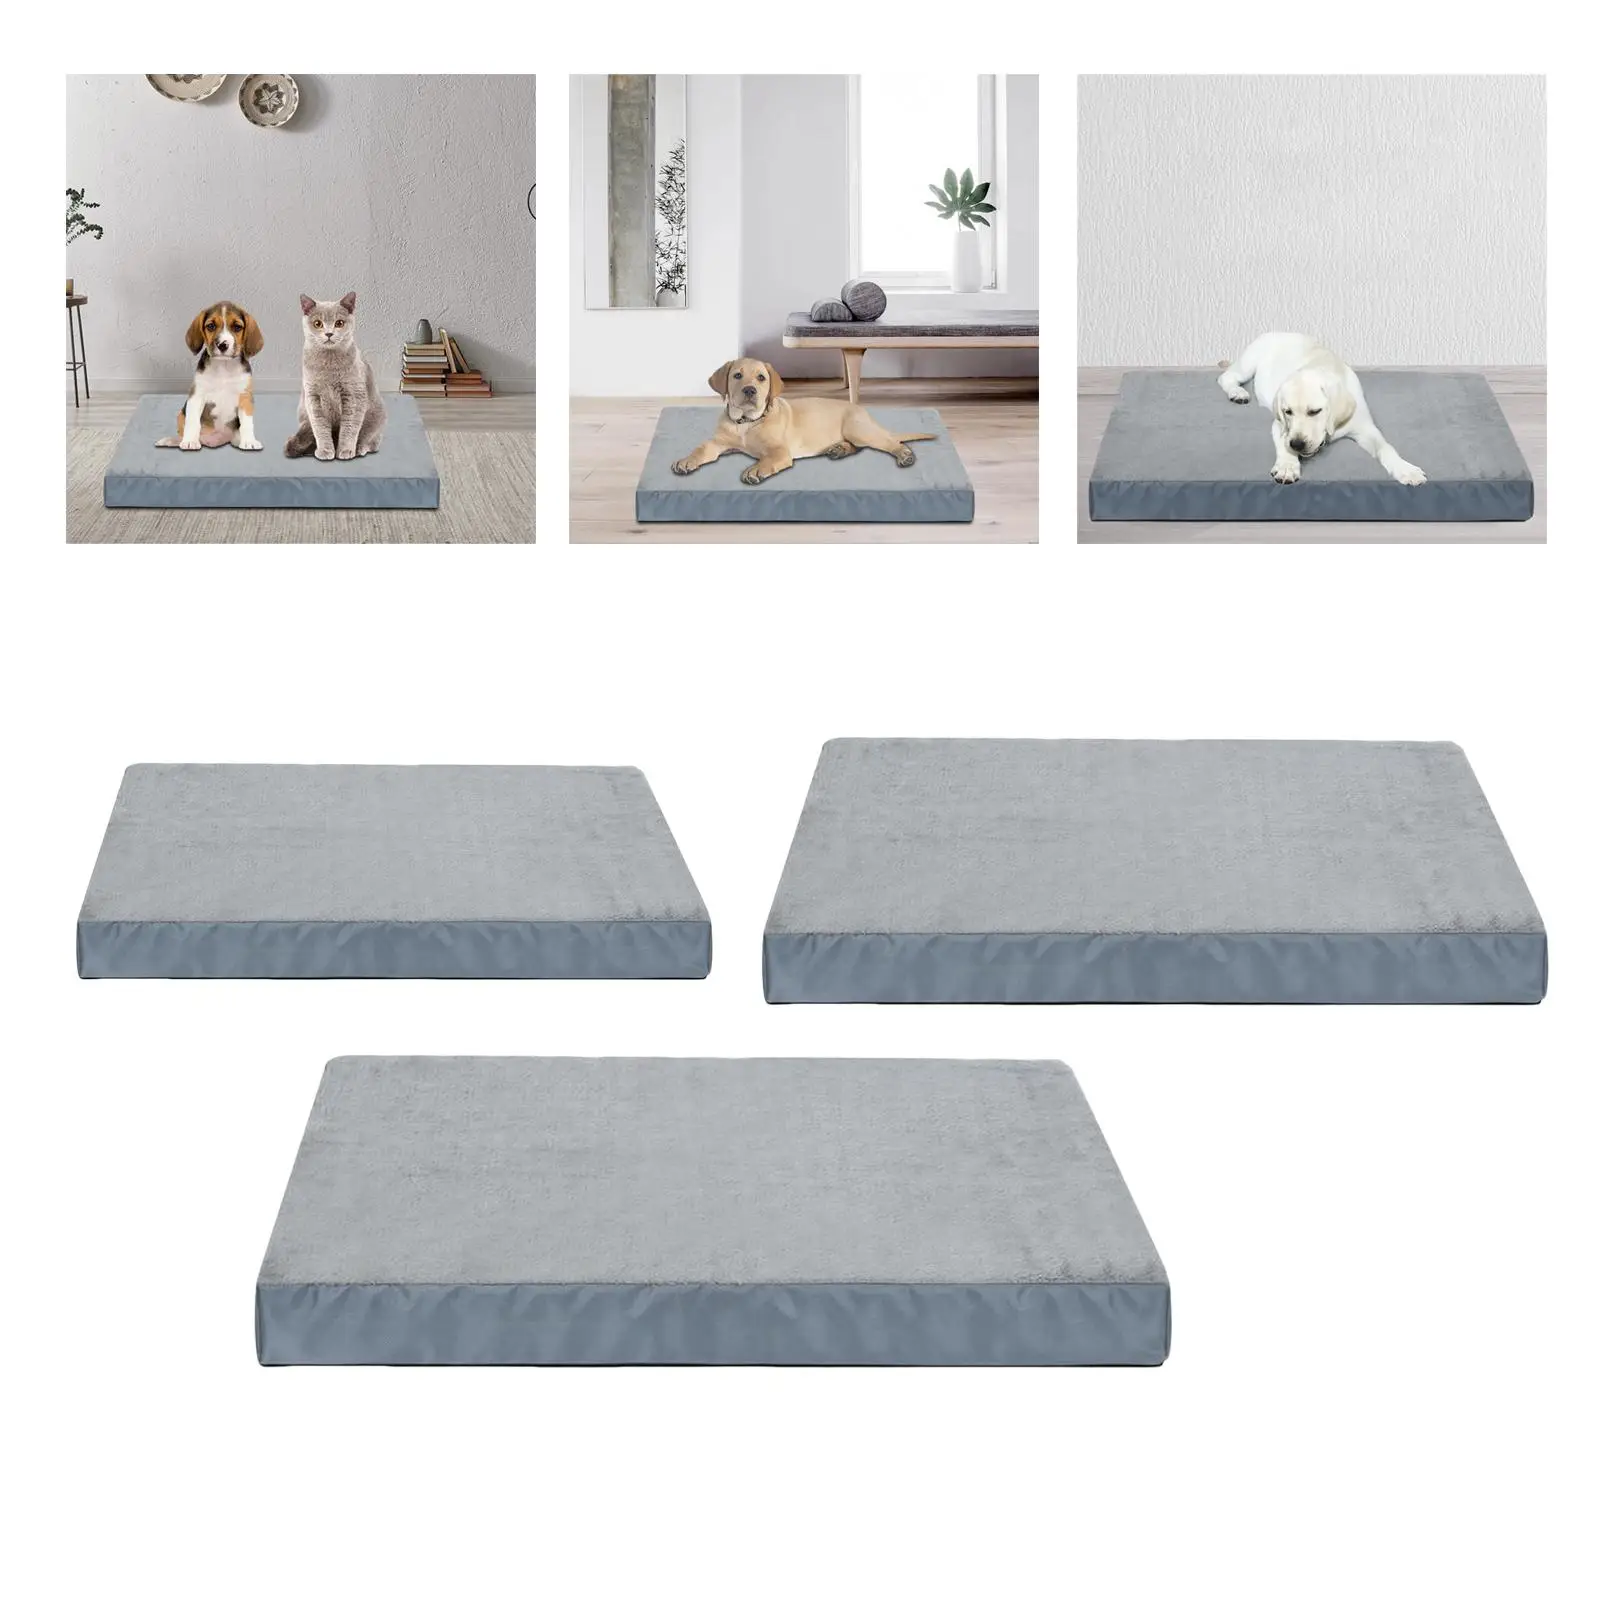 Pet Blanket Cat Sleep Pad Nonslip Bottom Cushion Warm Washable Dog Bed Mat for Sofa Doggy Small Medium Large Dog Crate Couch